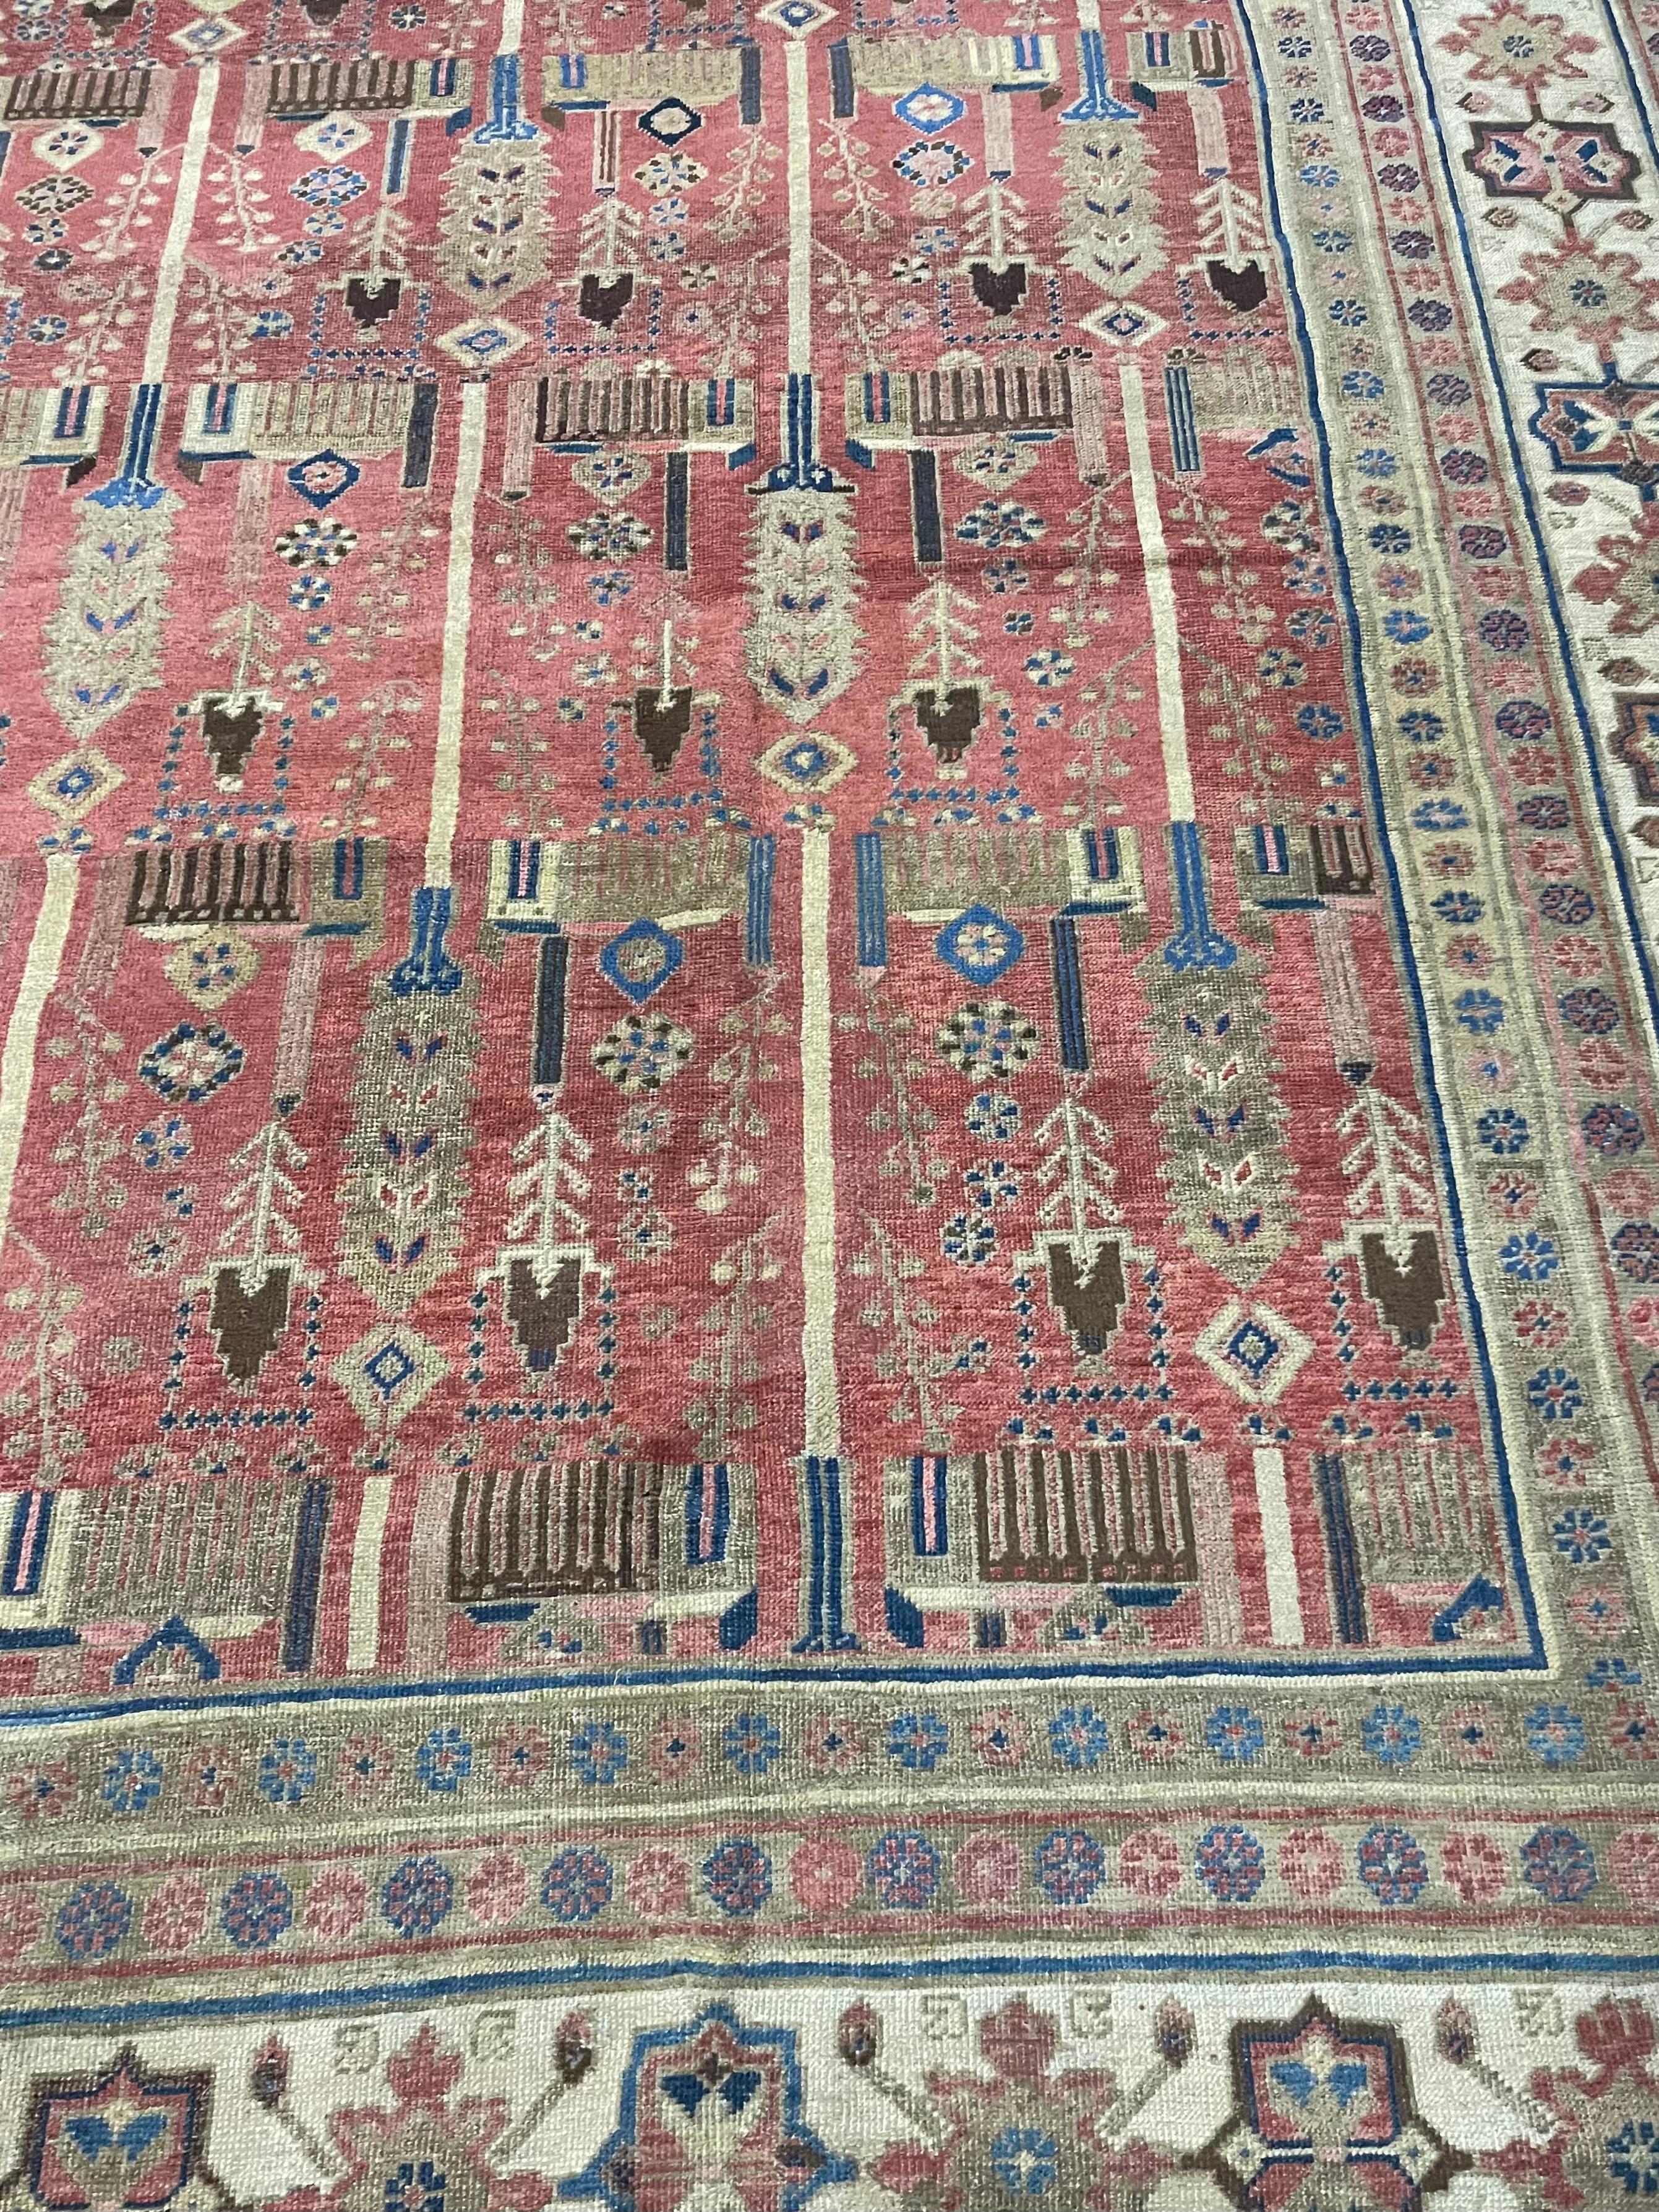 Hand-Knotted Handmade Antique Persian Bakhshaish Rug 12.2' x 15.8', 1880s - 1B21 For Sale